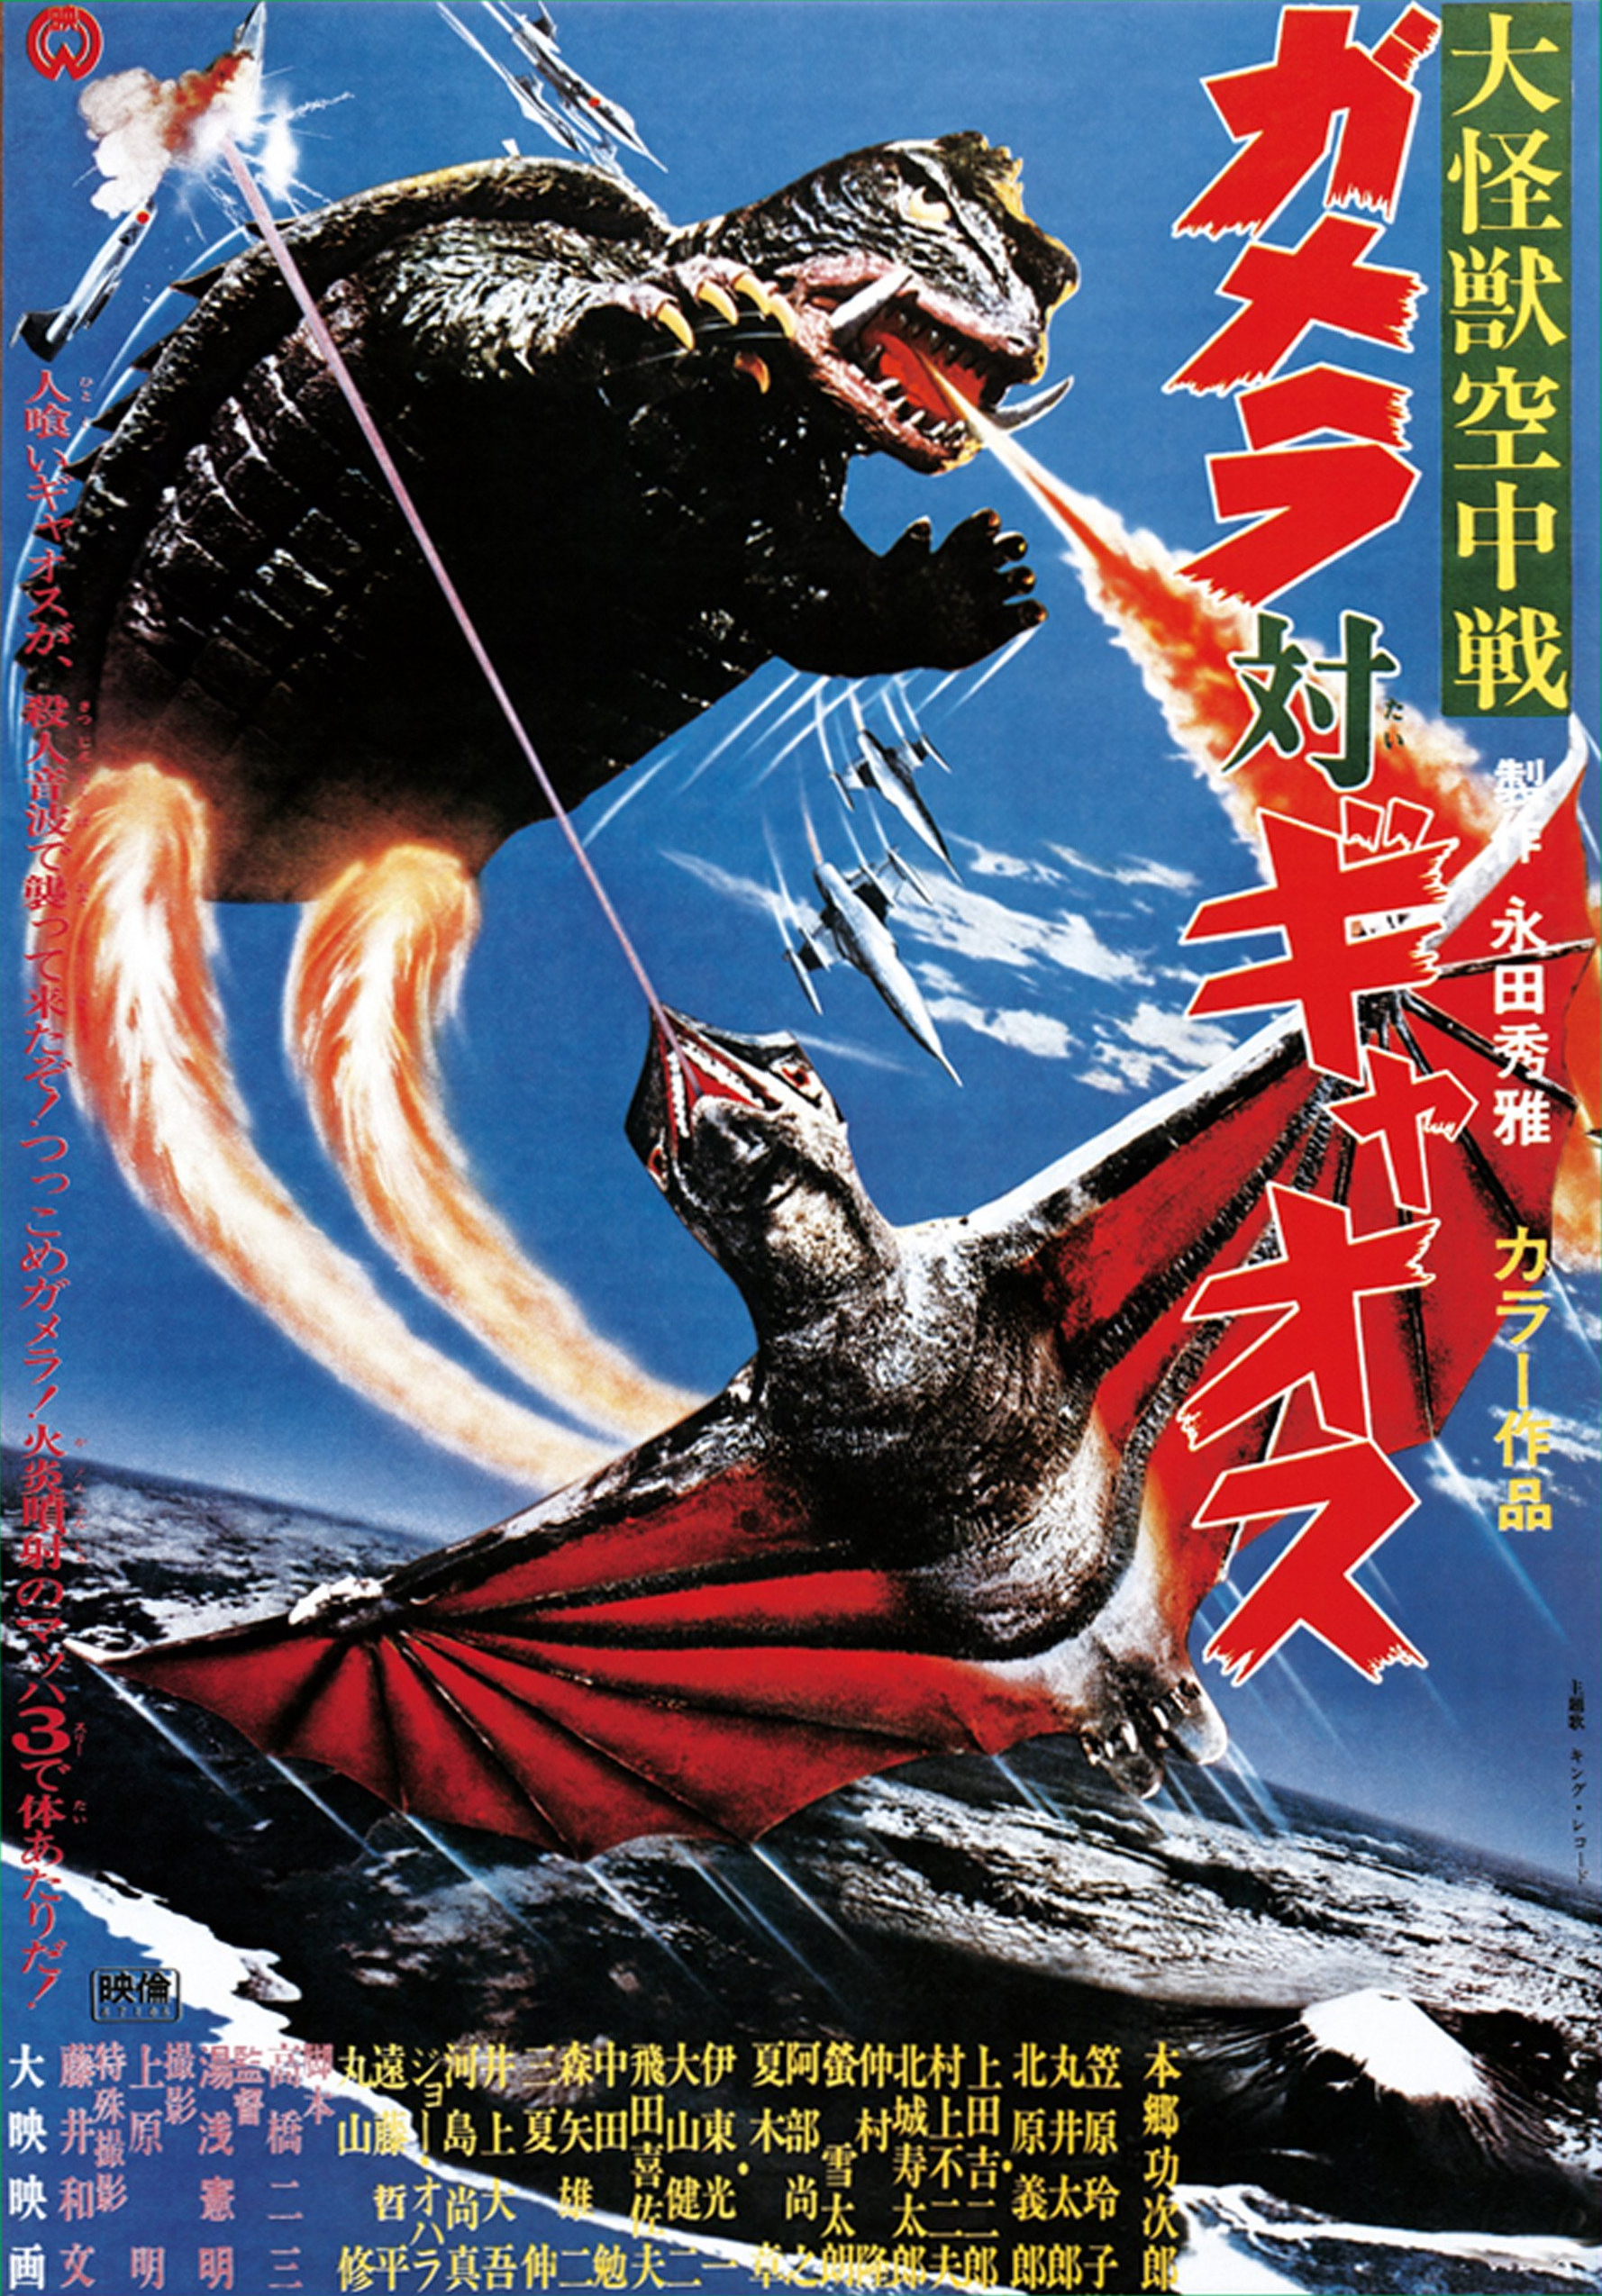 Late post. Official art promo of Rebirth Gamera & Gyaos with